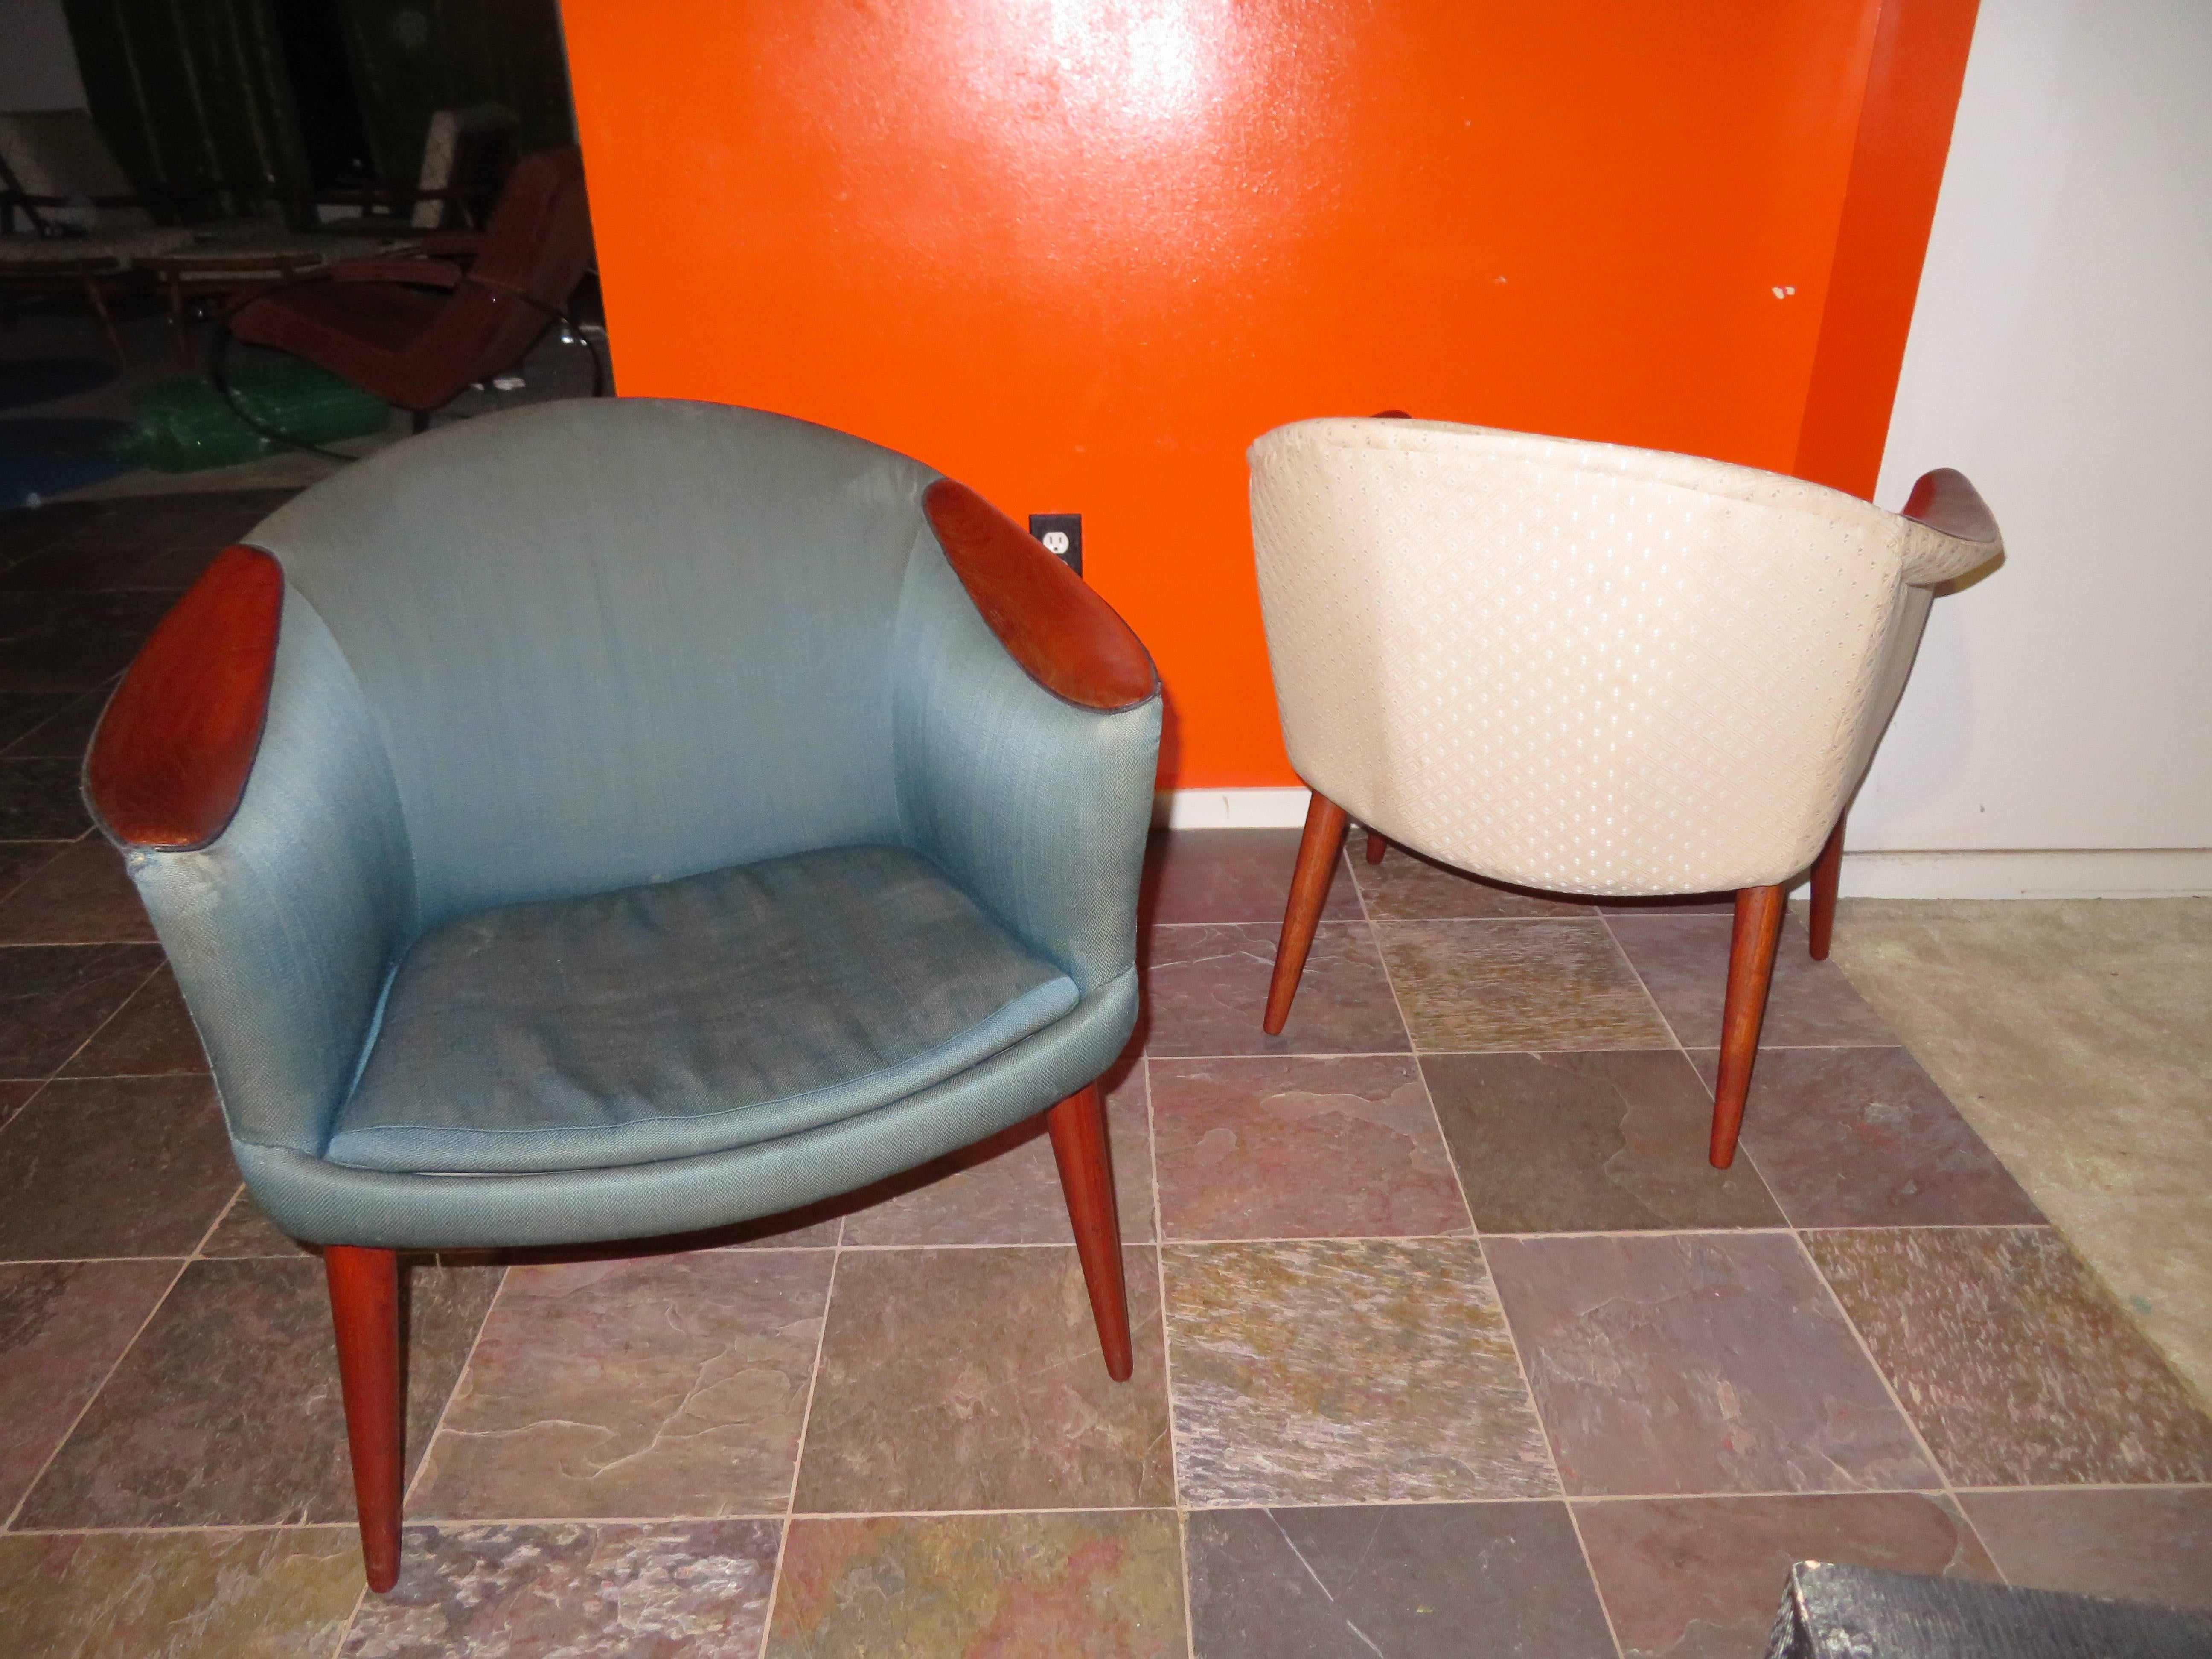 Wonderful pair of Nanna Ditzel style teak scoop lounge chairs. This pair will need new upholstery but that's what you designers are looking for anyway -right? Chairs have gorgeous sleek scooped teak arm pads with sexy long legs all having a warm